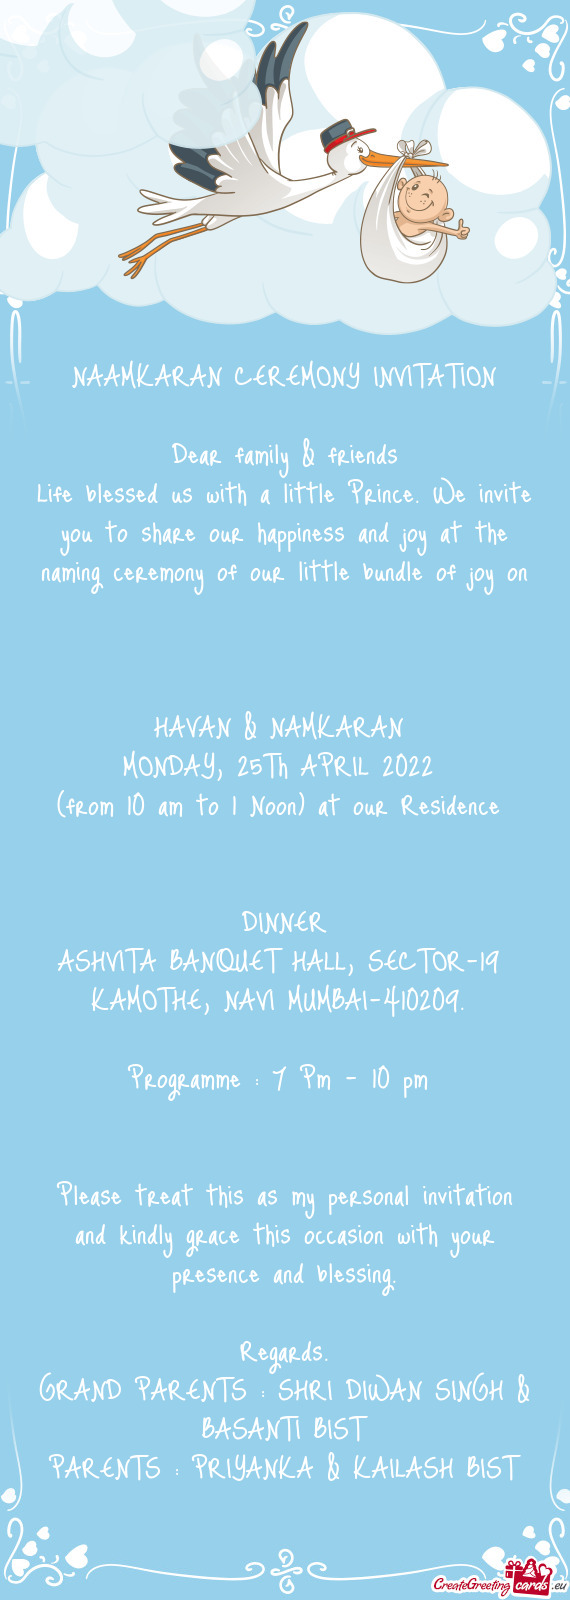 (from 10 am to 1 Noon) at our Residence